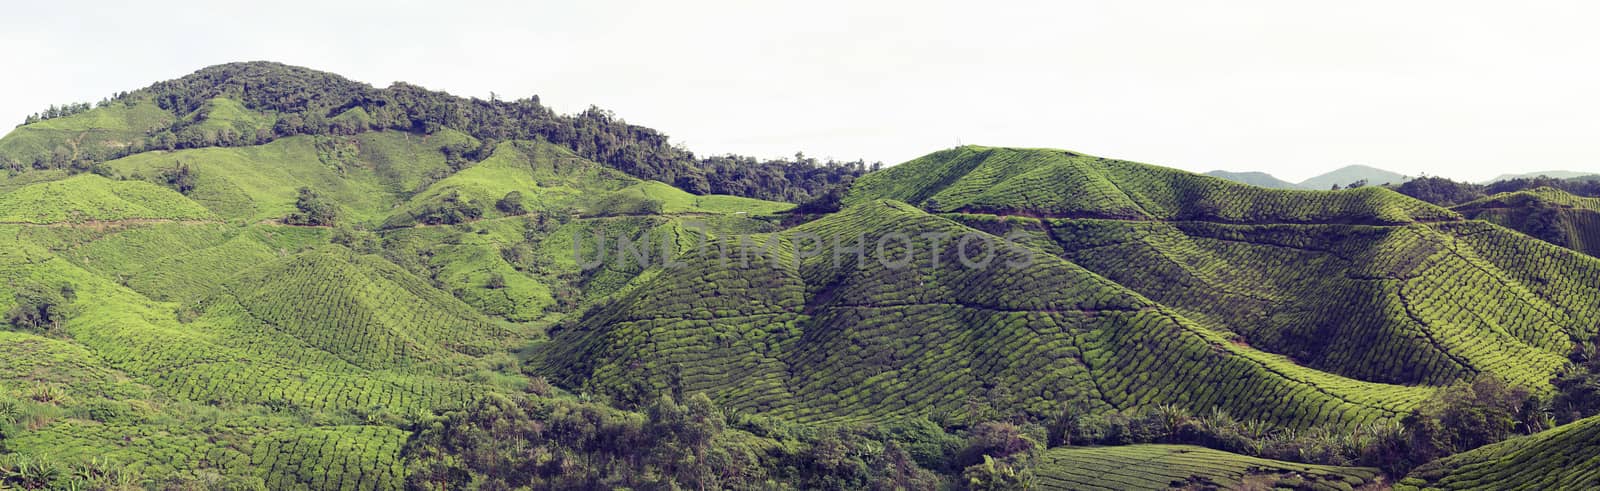 Tea plantations in Malaysia by Vanzyst